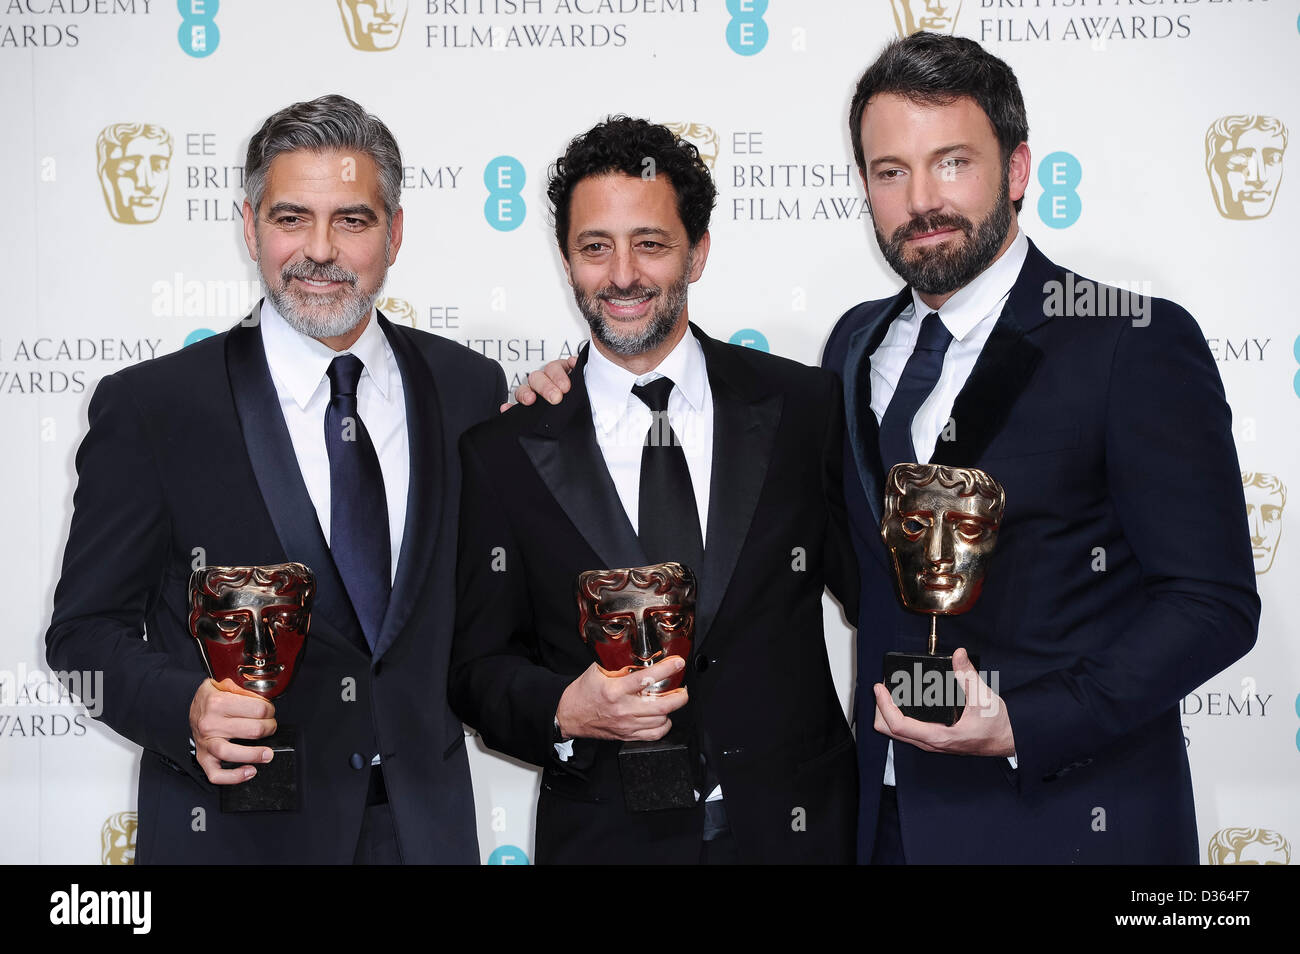 London, UK. Feb 10th, 2013. Best Film winners George Clooney, Grant Heslov and Ben Affleck pose in the Press Room at the EE British Academy Film Awards at The Royal Opera House on February 10, 2013 in London, England. Credit: London Entertainment/Alamy Live News Stock Photo